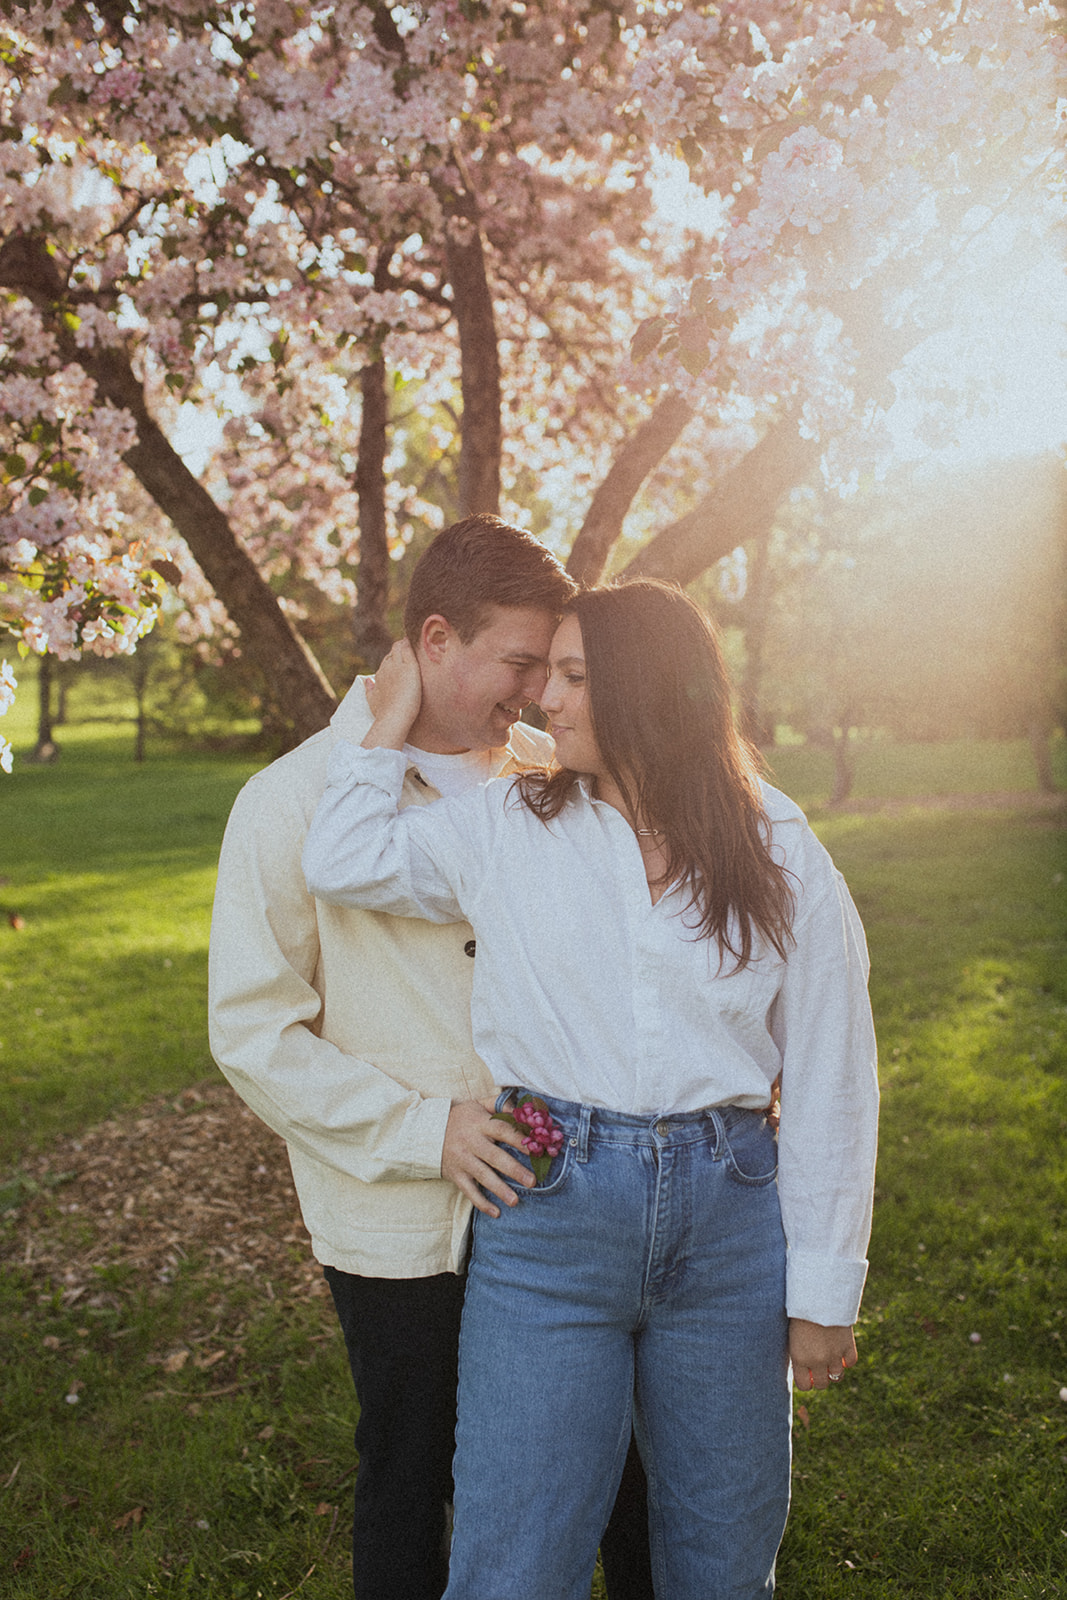 couple embracing each other at sunrise under flowering trees